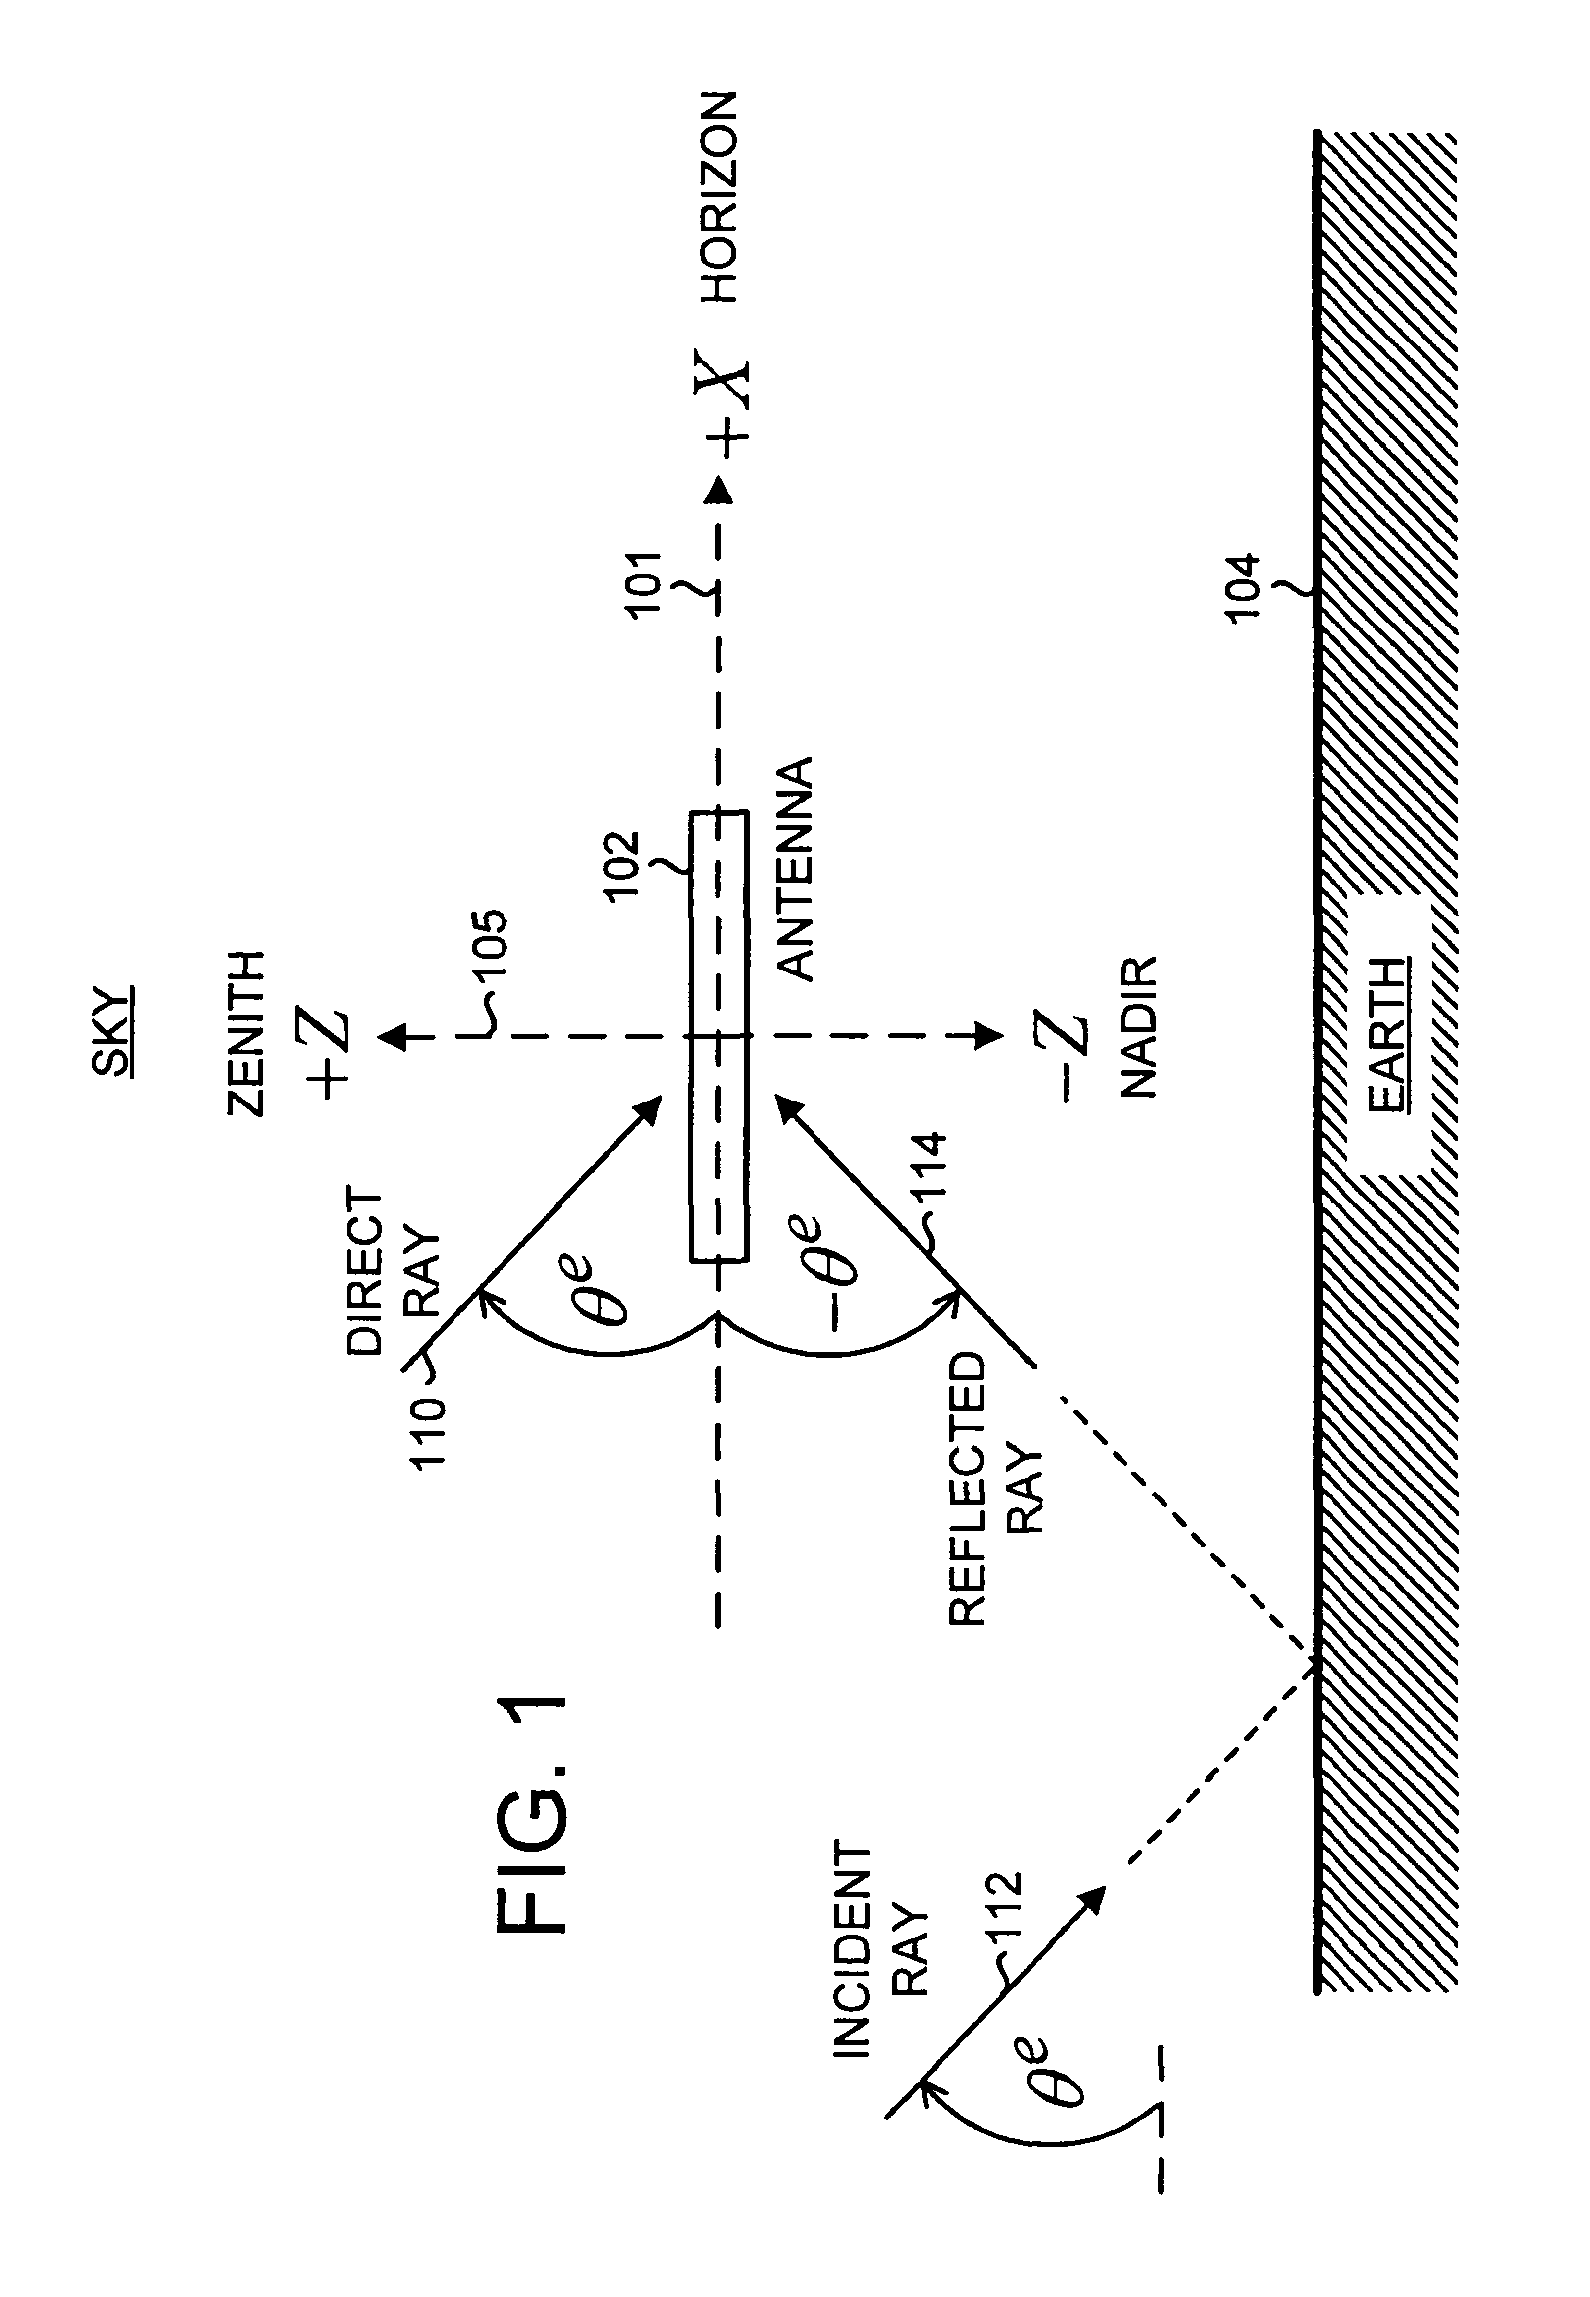 Compact antenna system with reduced multipath reception